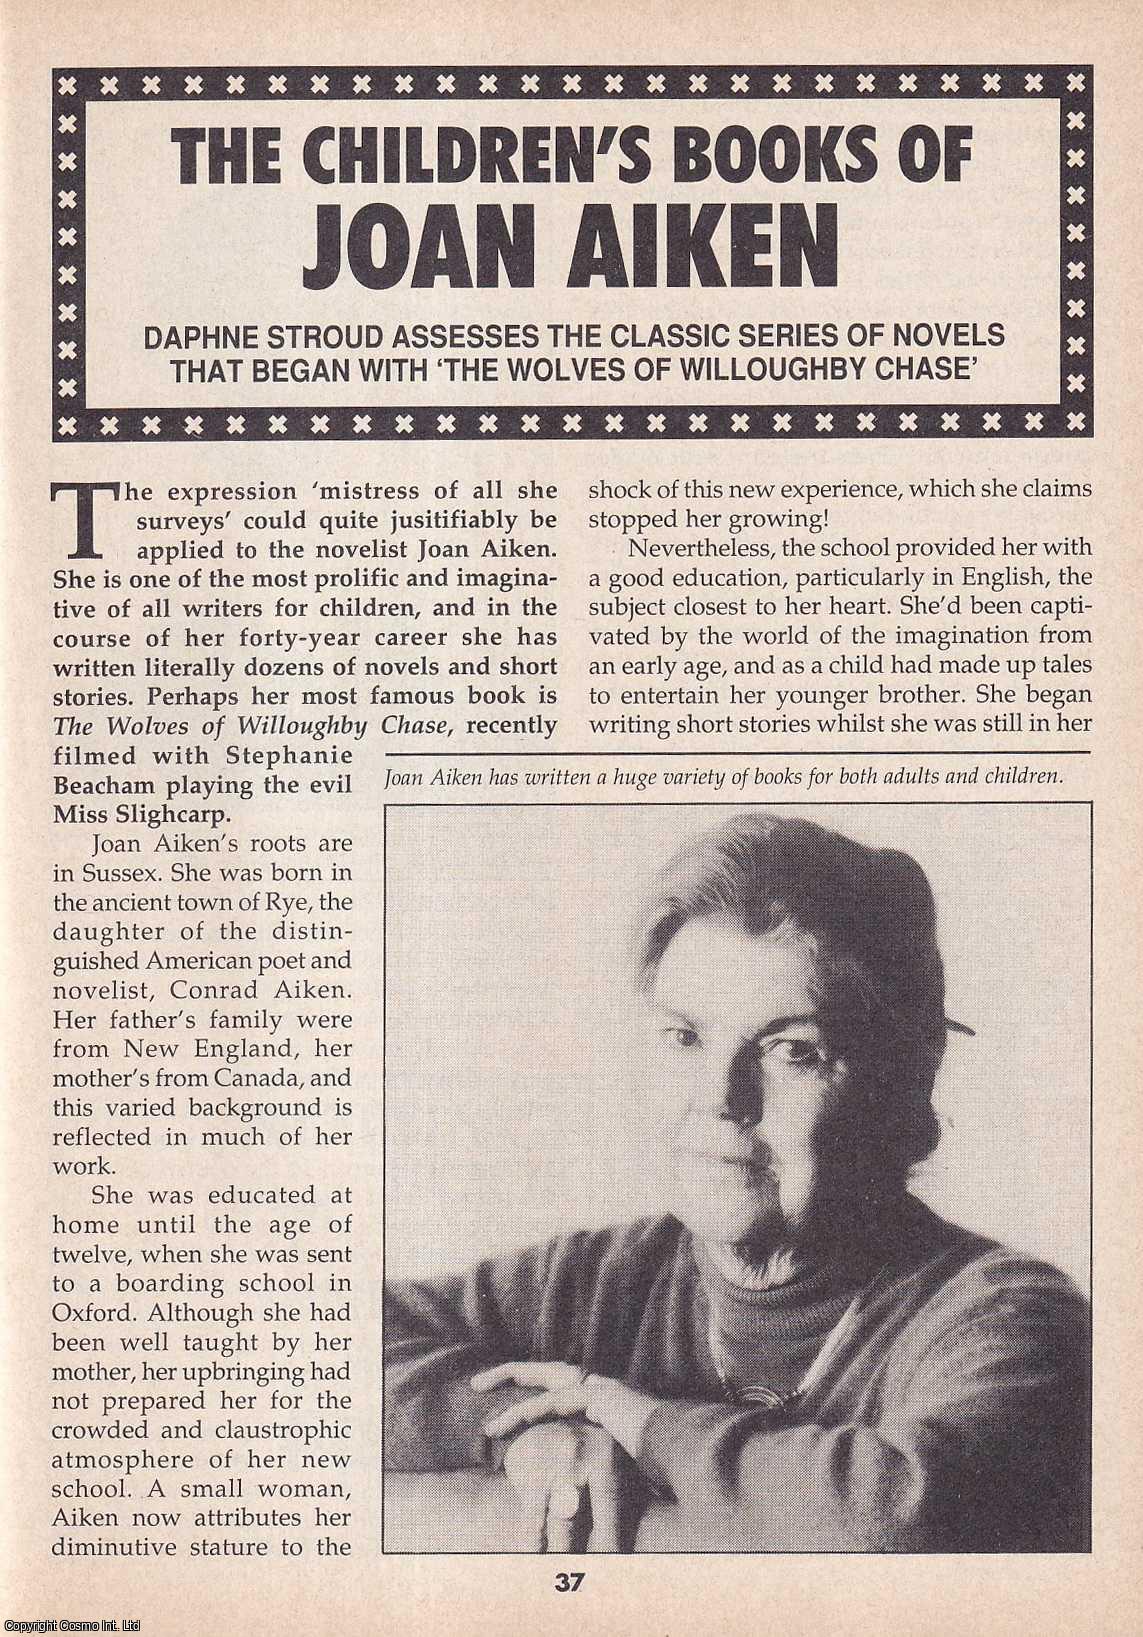 Daphne Stroud - The Children's Books of Joan Aiken. This is an original article separated from an issue of The Book & Magazine Collector publication, 1992.